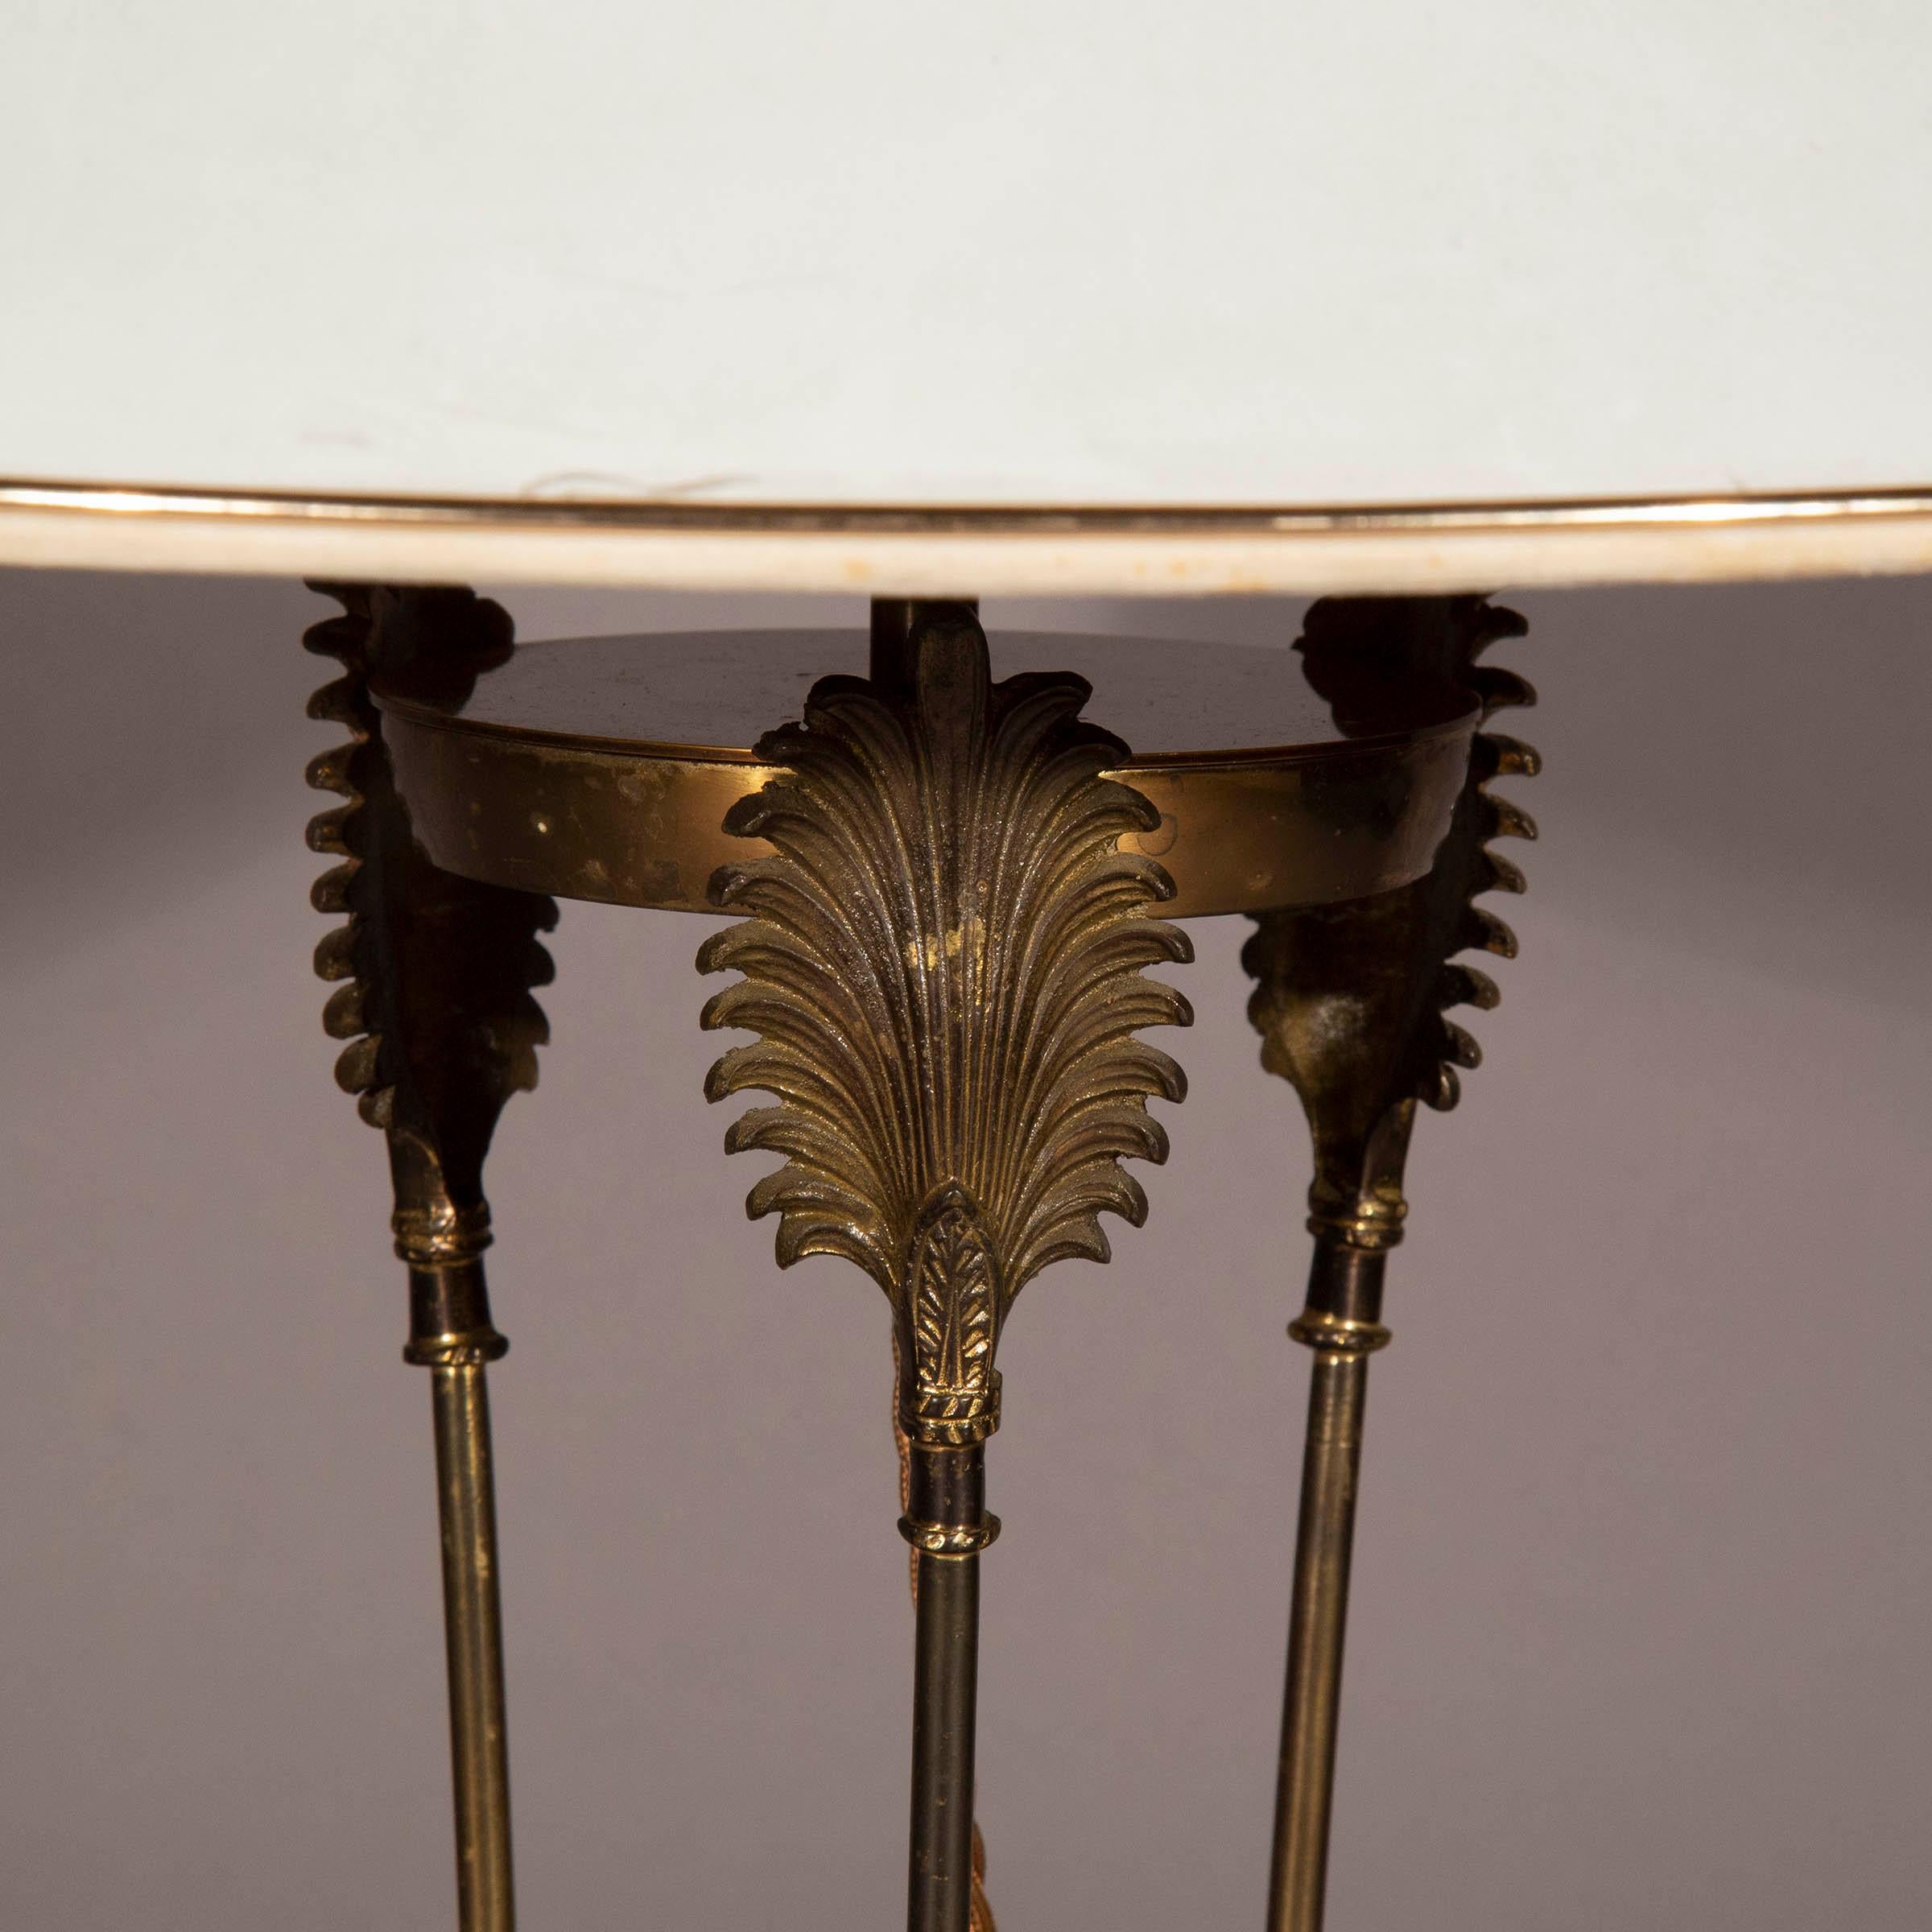 An unusual bronze 'Athénienne' table lamp in the Grand Tour taste. 20th century.

Why we like it

Formed of three arrows, this design derives from the sacrificial tripods, later known as athéniennes that were used in ancient Greece and Rome, the